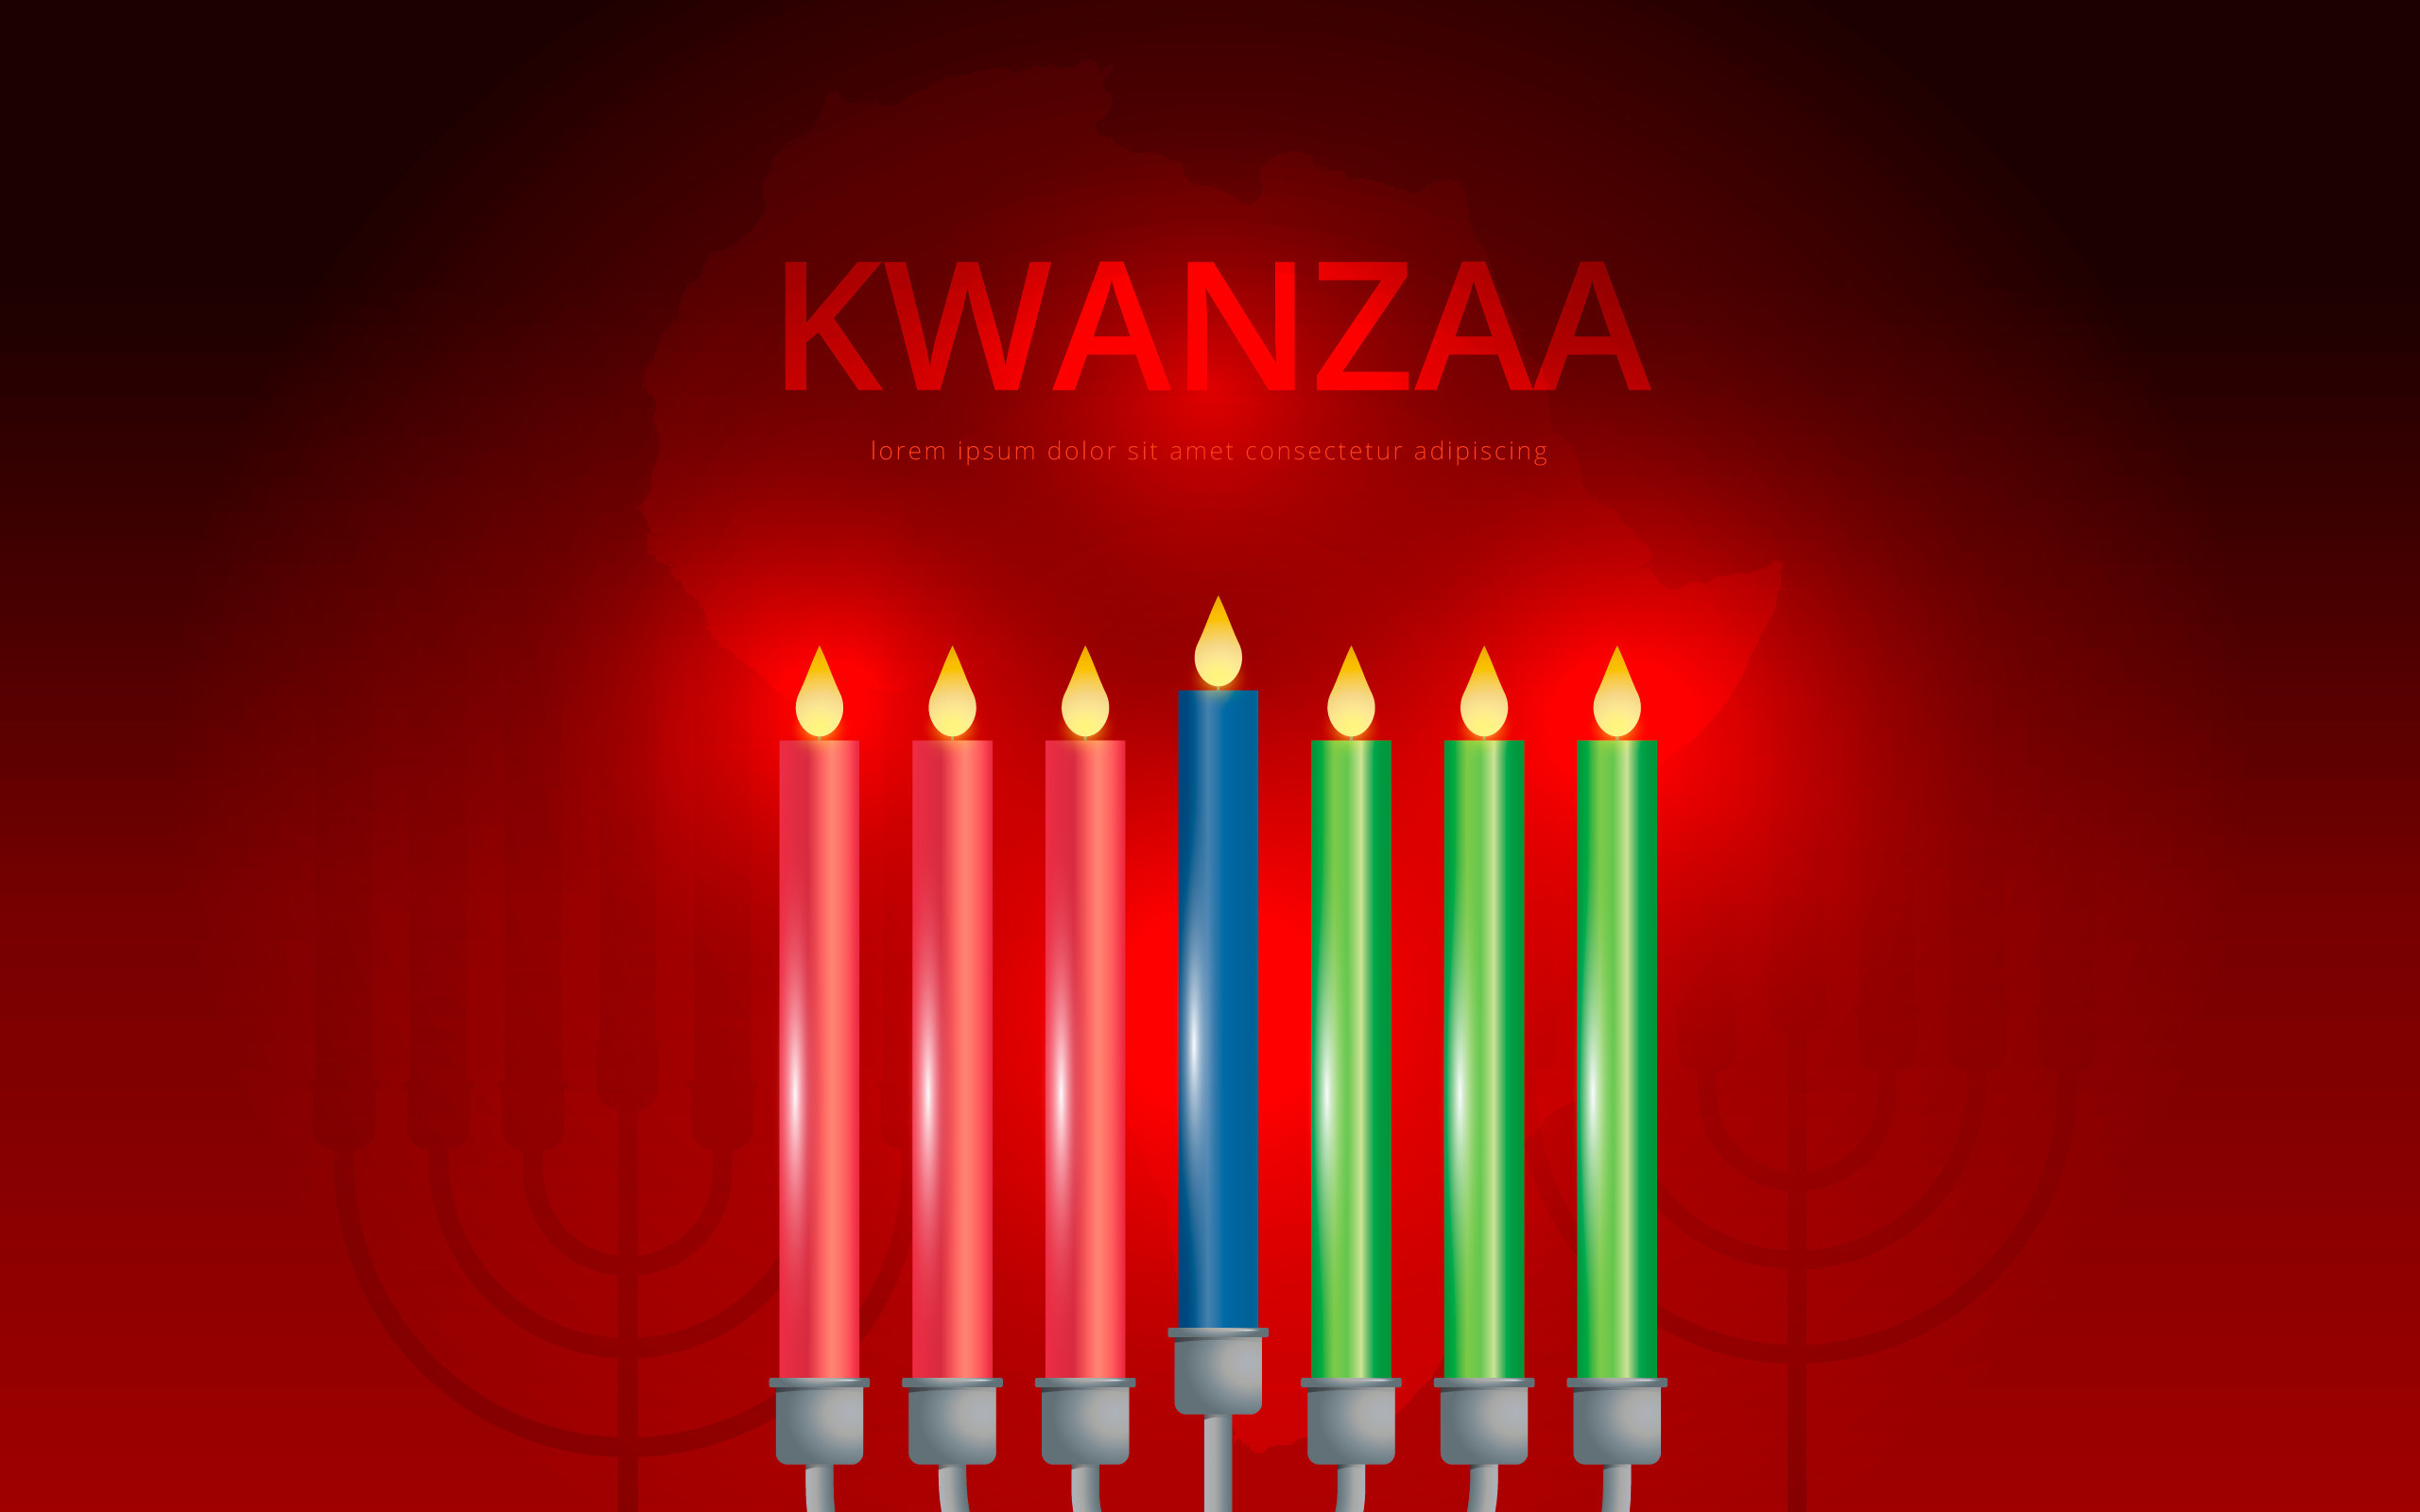 2560x1600 Kwanzaa Illustration Greetings. African American holiday festival of  harvest.